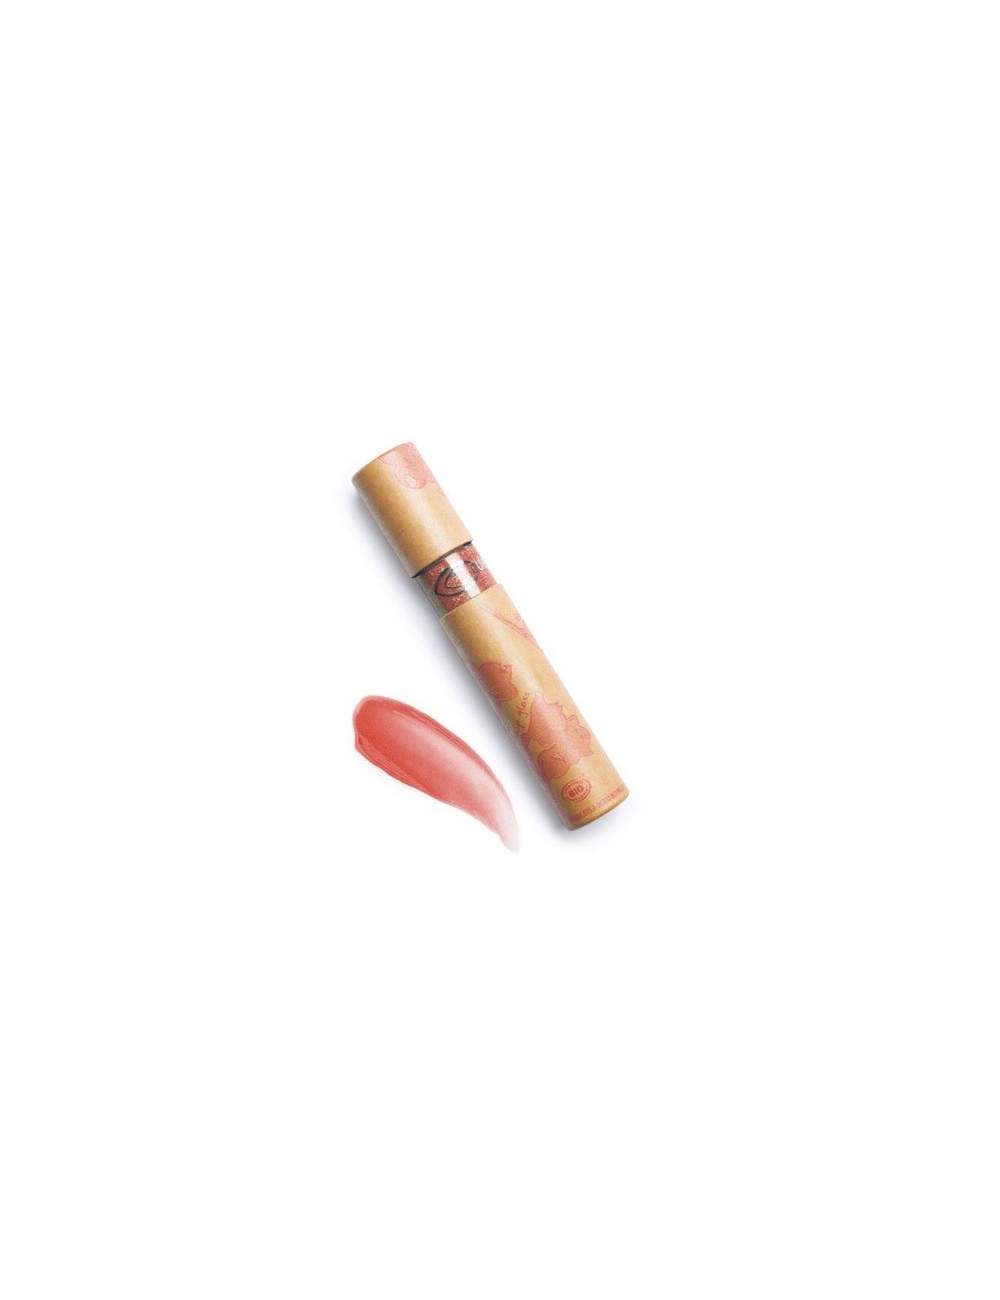 Gloss Bio 808 Pearly Coral. Couleur Caramel